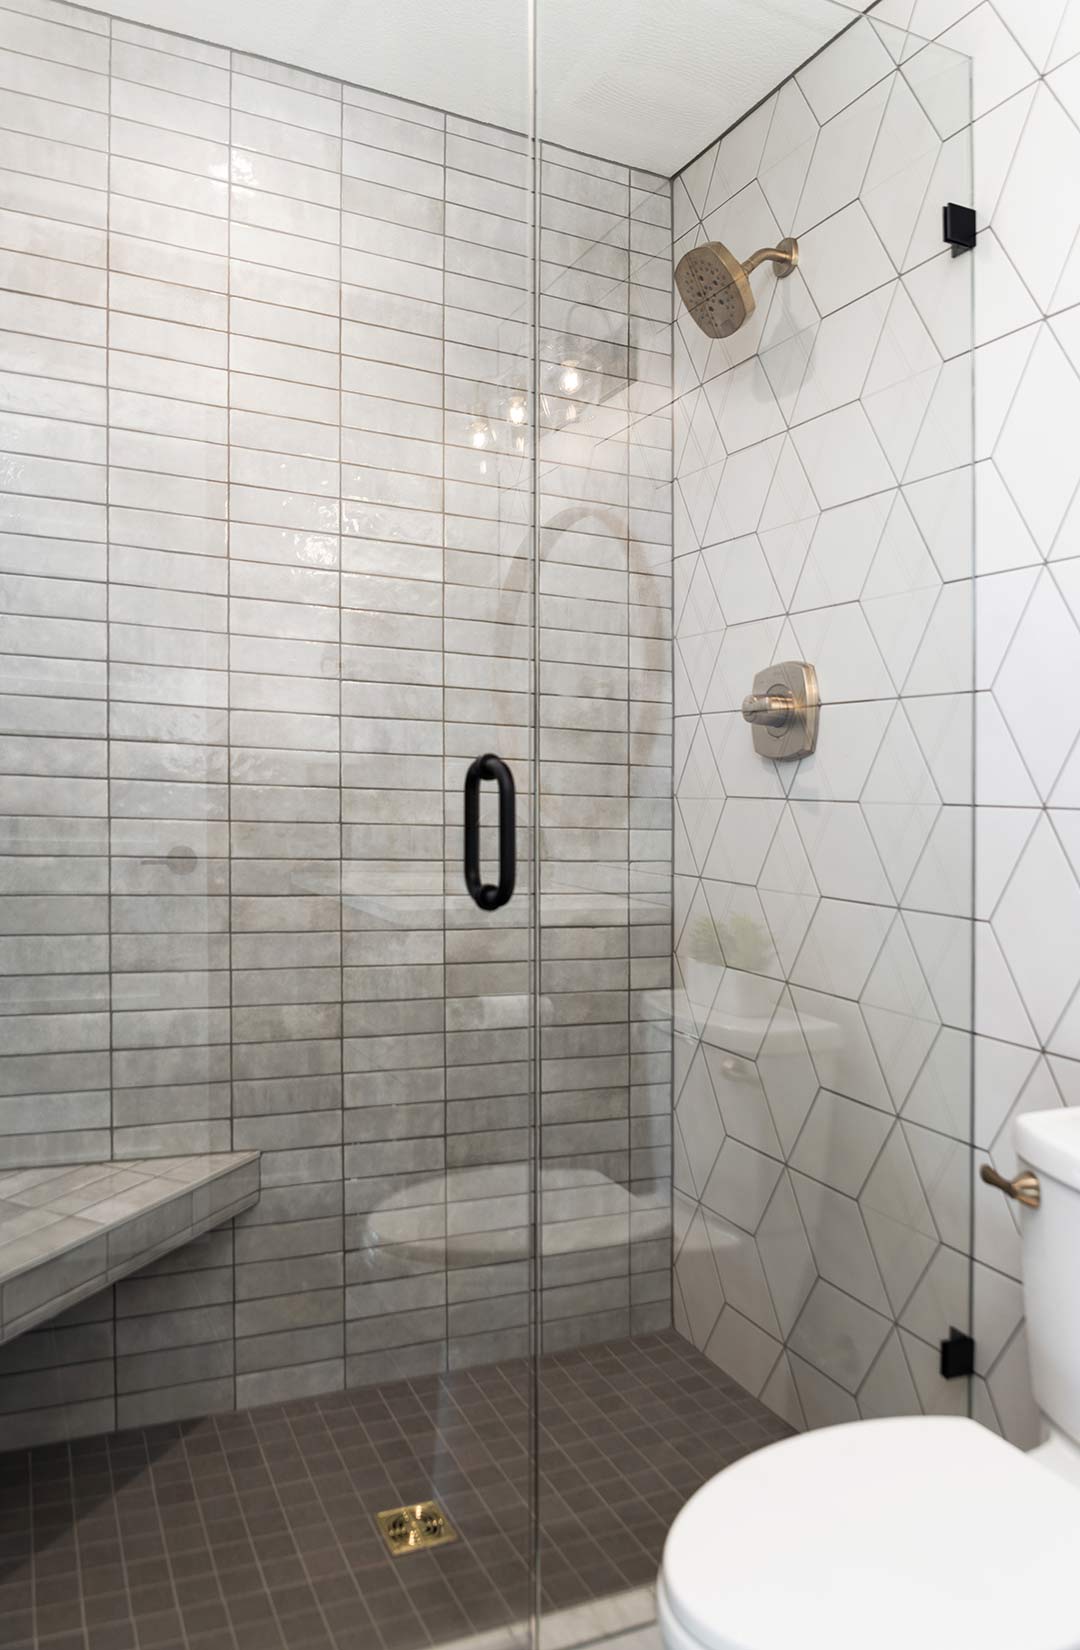 A walk in shower designed by Freestone Design-Build with frameless glass and a custom tile pattern